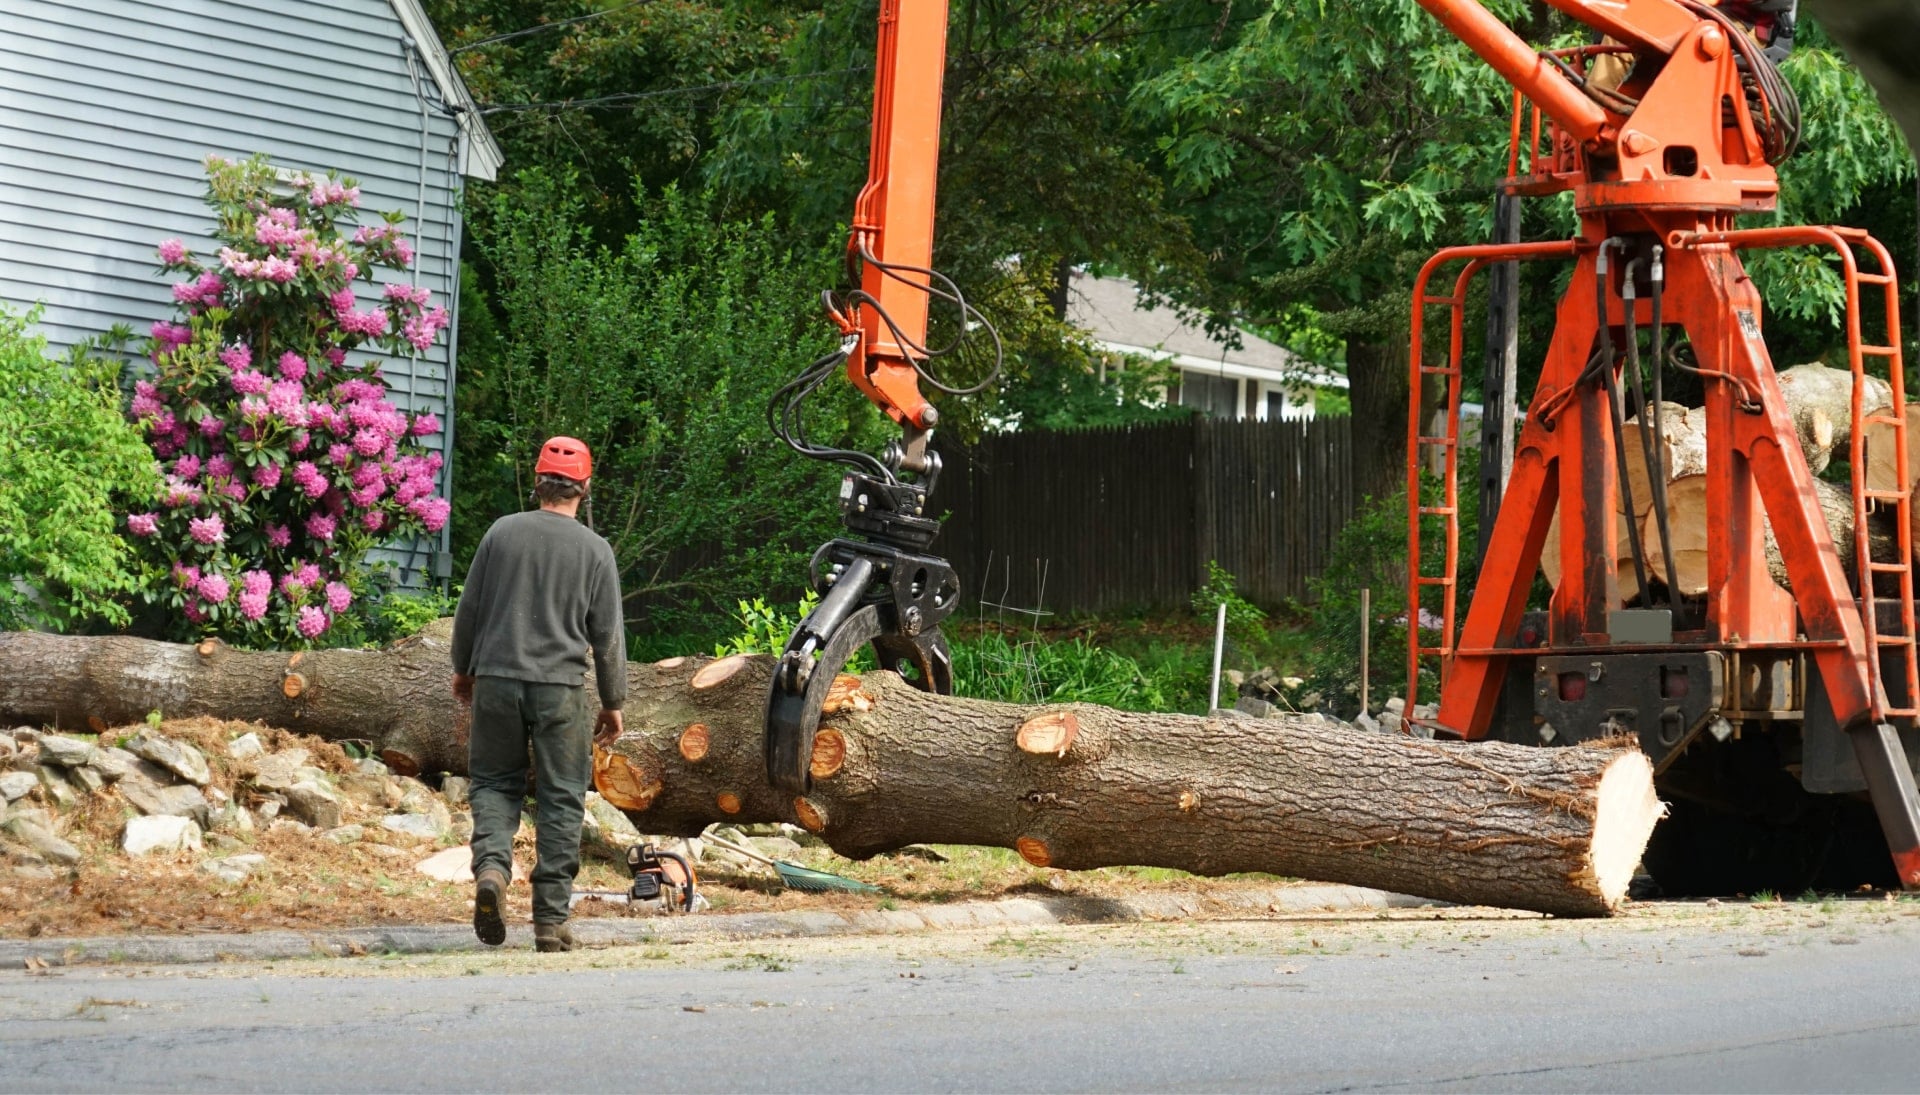 Expert tree removal services in Hendersonville, TN, providing safe and efficient removal of trees from residential and commercial properties. Our skilled and licensed arborists use advanced techniques and equipment to ensure the safe and complete removal of trees, no matter the size or location.